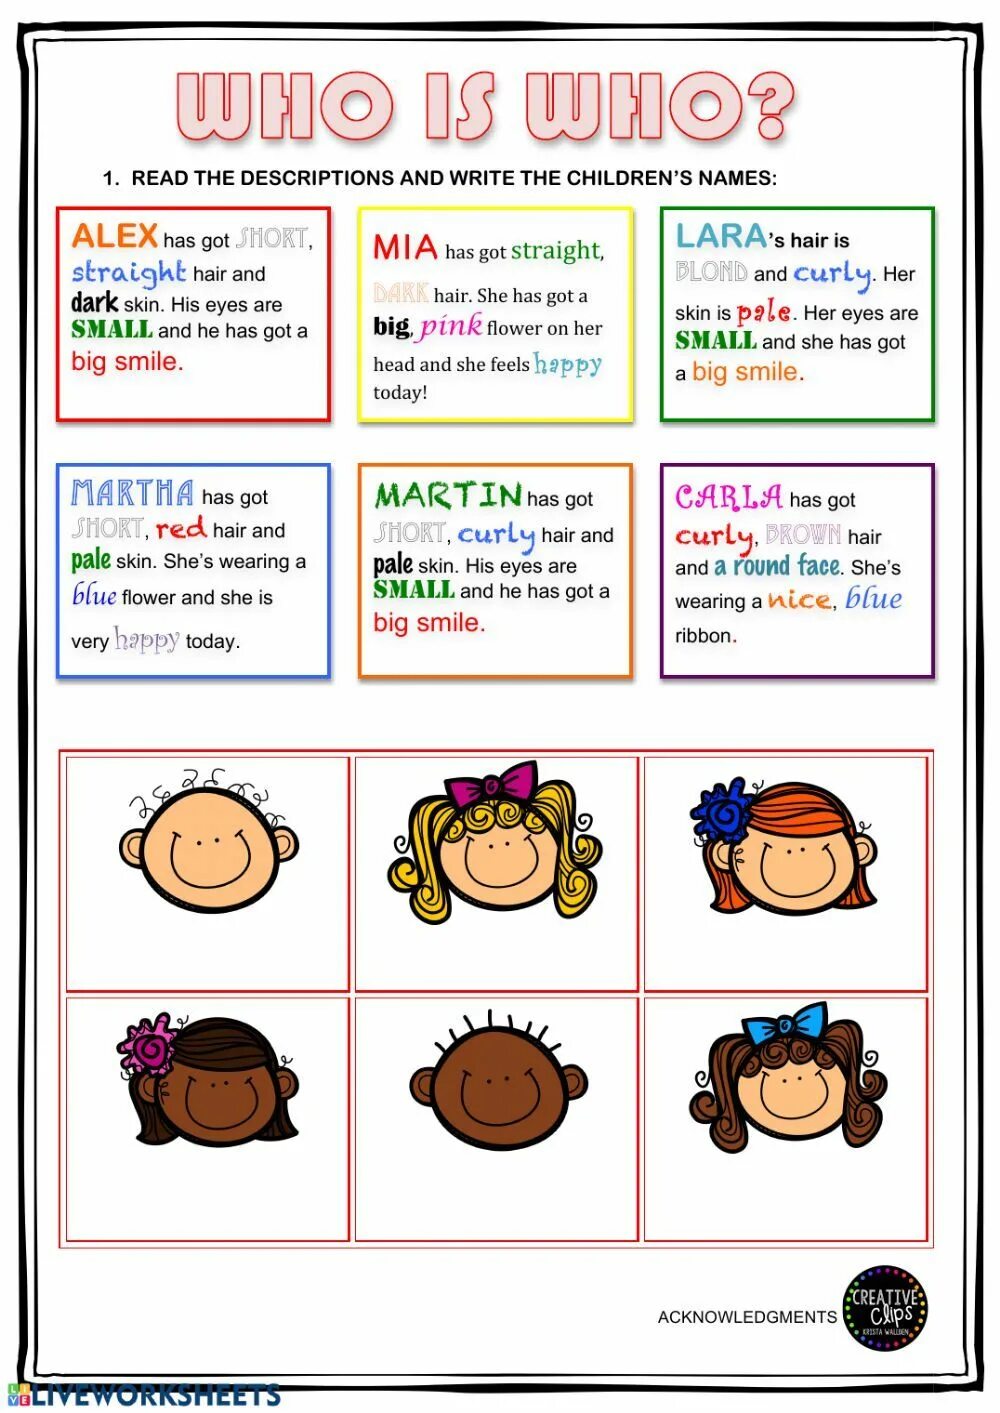 Who is who vocabulary. Physical description Worksheets. Physical description for Kids. Who is who Worksheets. Appearance description Worksheets.